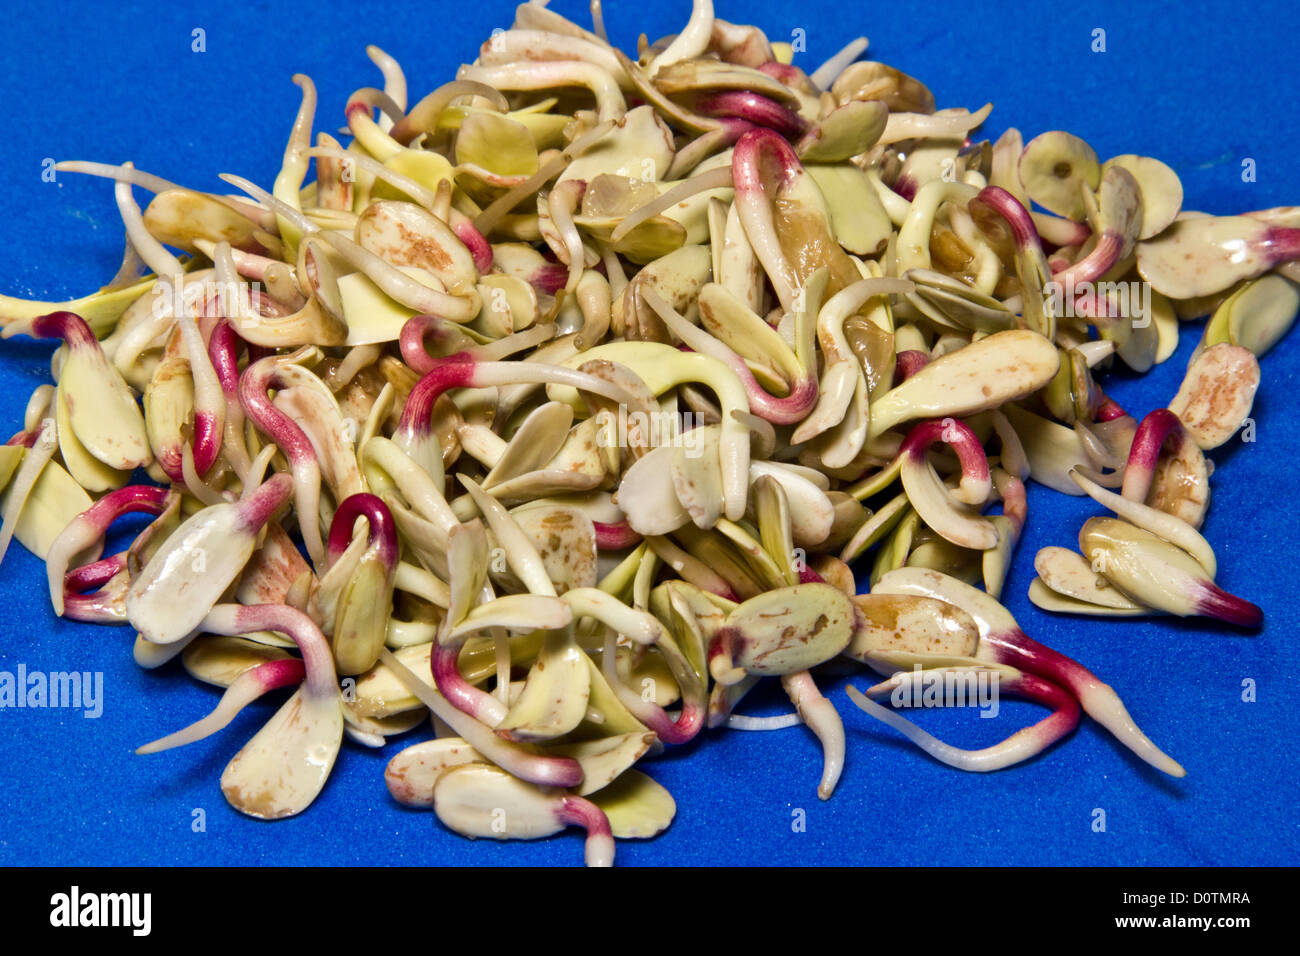 greens, health, healthy, nutrition, raw food, food, sprouts, vegan, vegetables, vegetarian, veggie, sunflower seeds sprouts Stock Photo